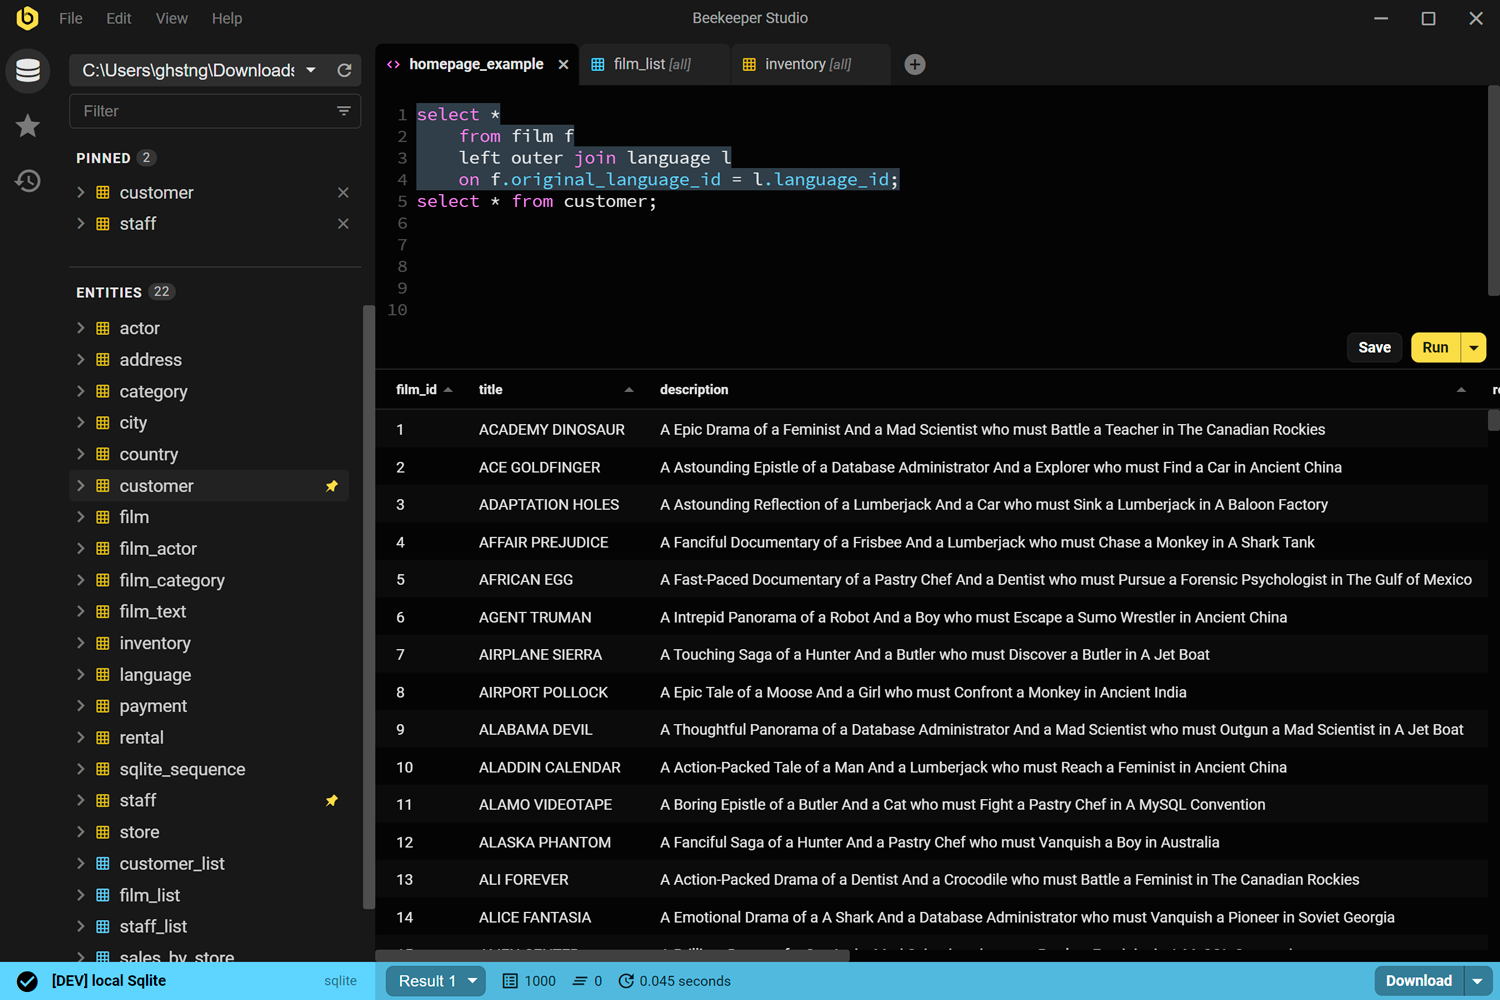 Beekeeper Studio: The SQL Editor and Database Manager